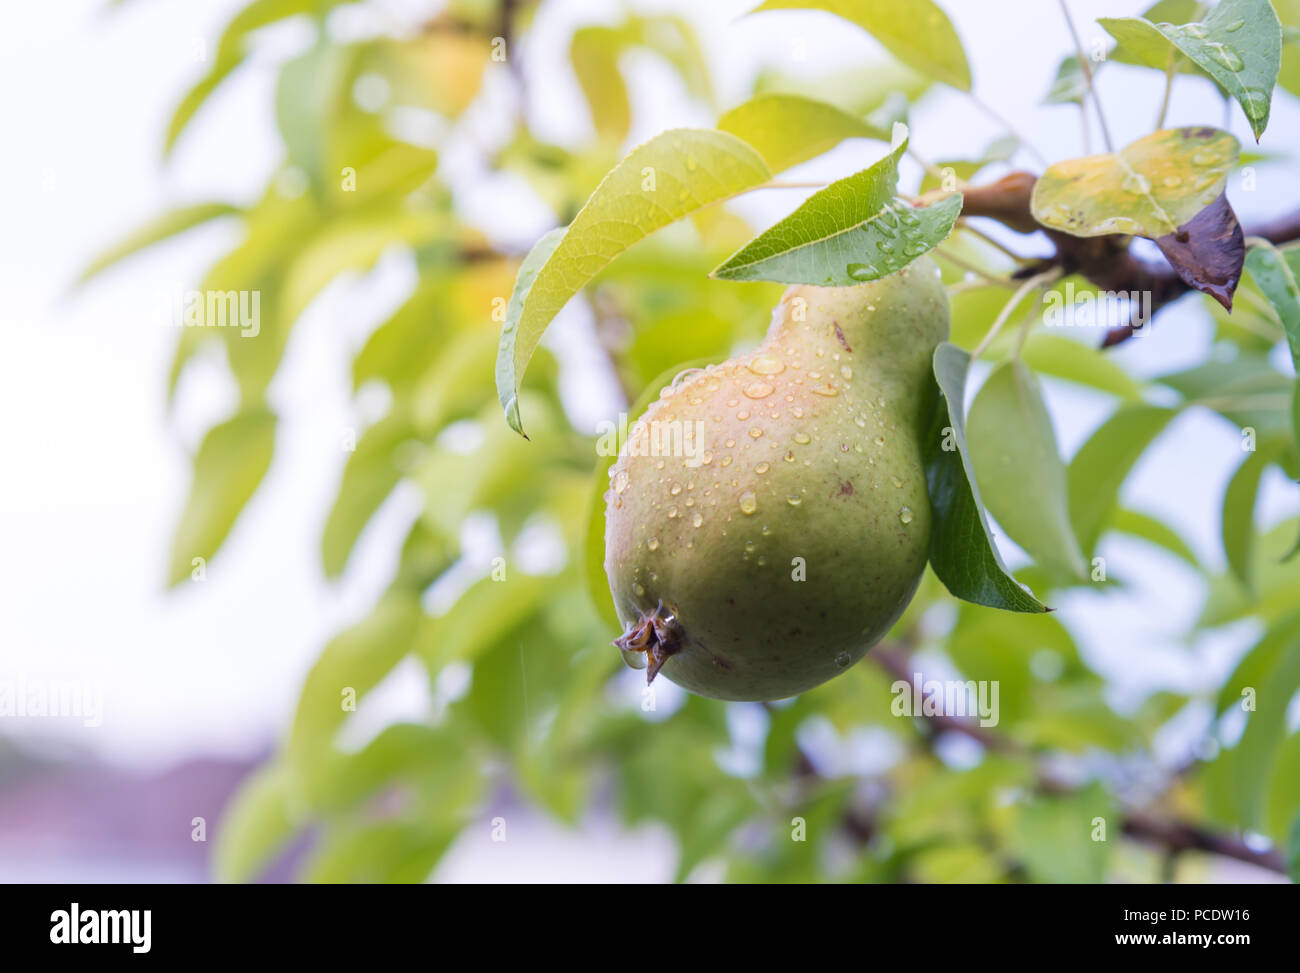 A Fresh vibrant pear hanging from a tree after rain. A pear with water droplets on it, with plants and leaves in the background. Stock Photo